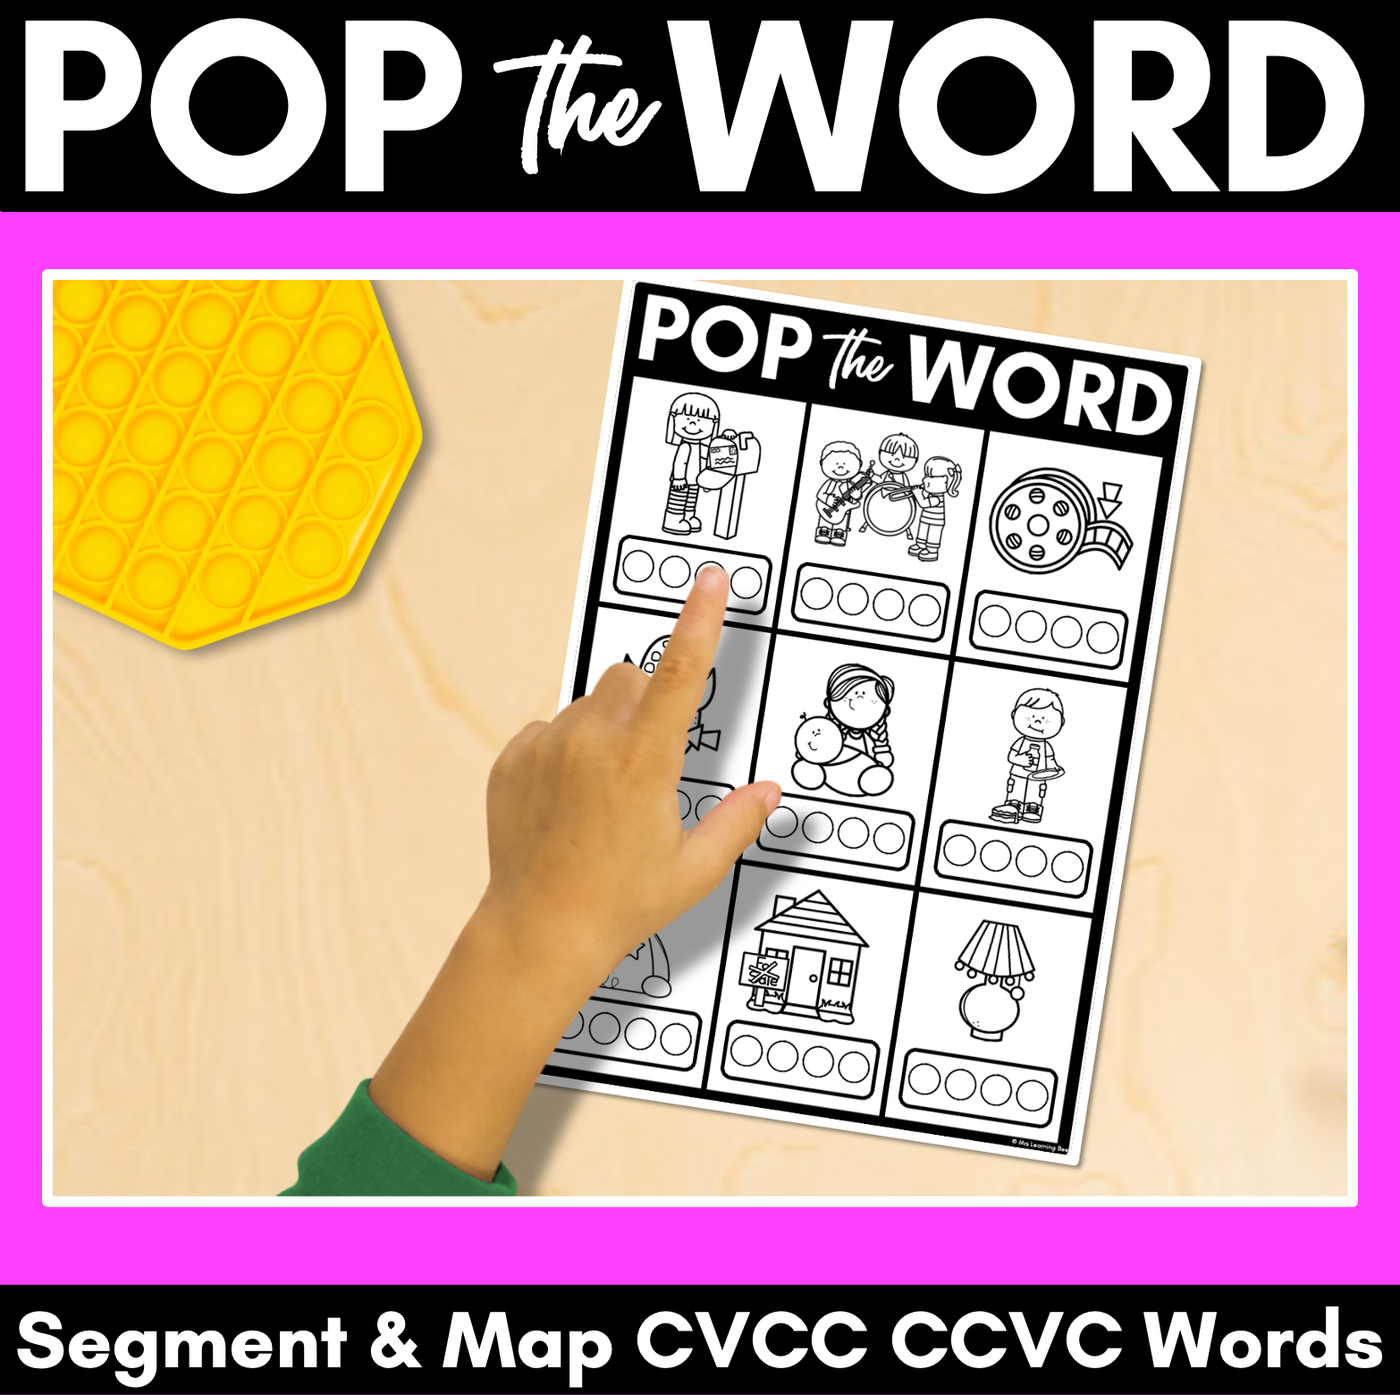 CVCC & CCVC WORD WORKSHEETS for POPPITS - Phonemic Awareness + Word Mapping